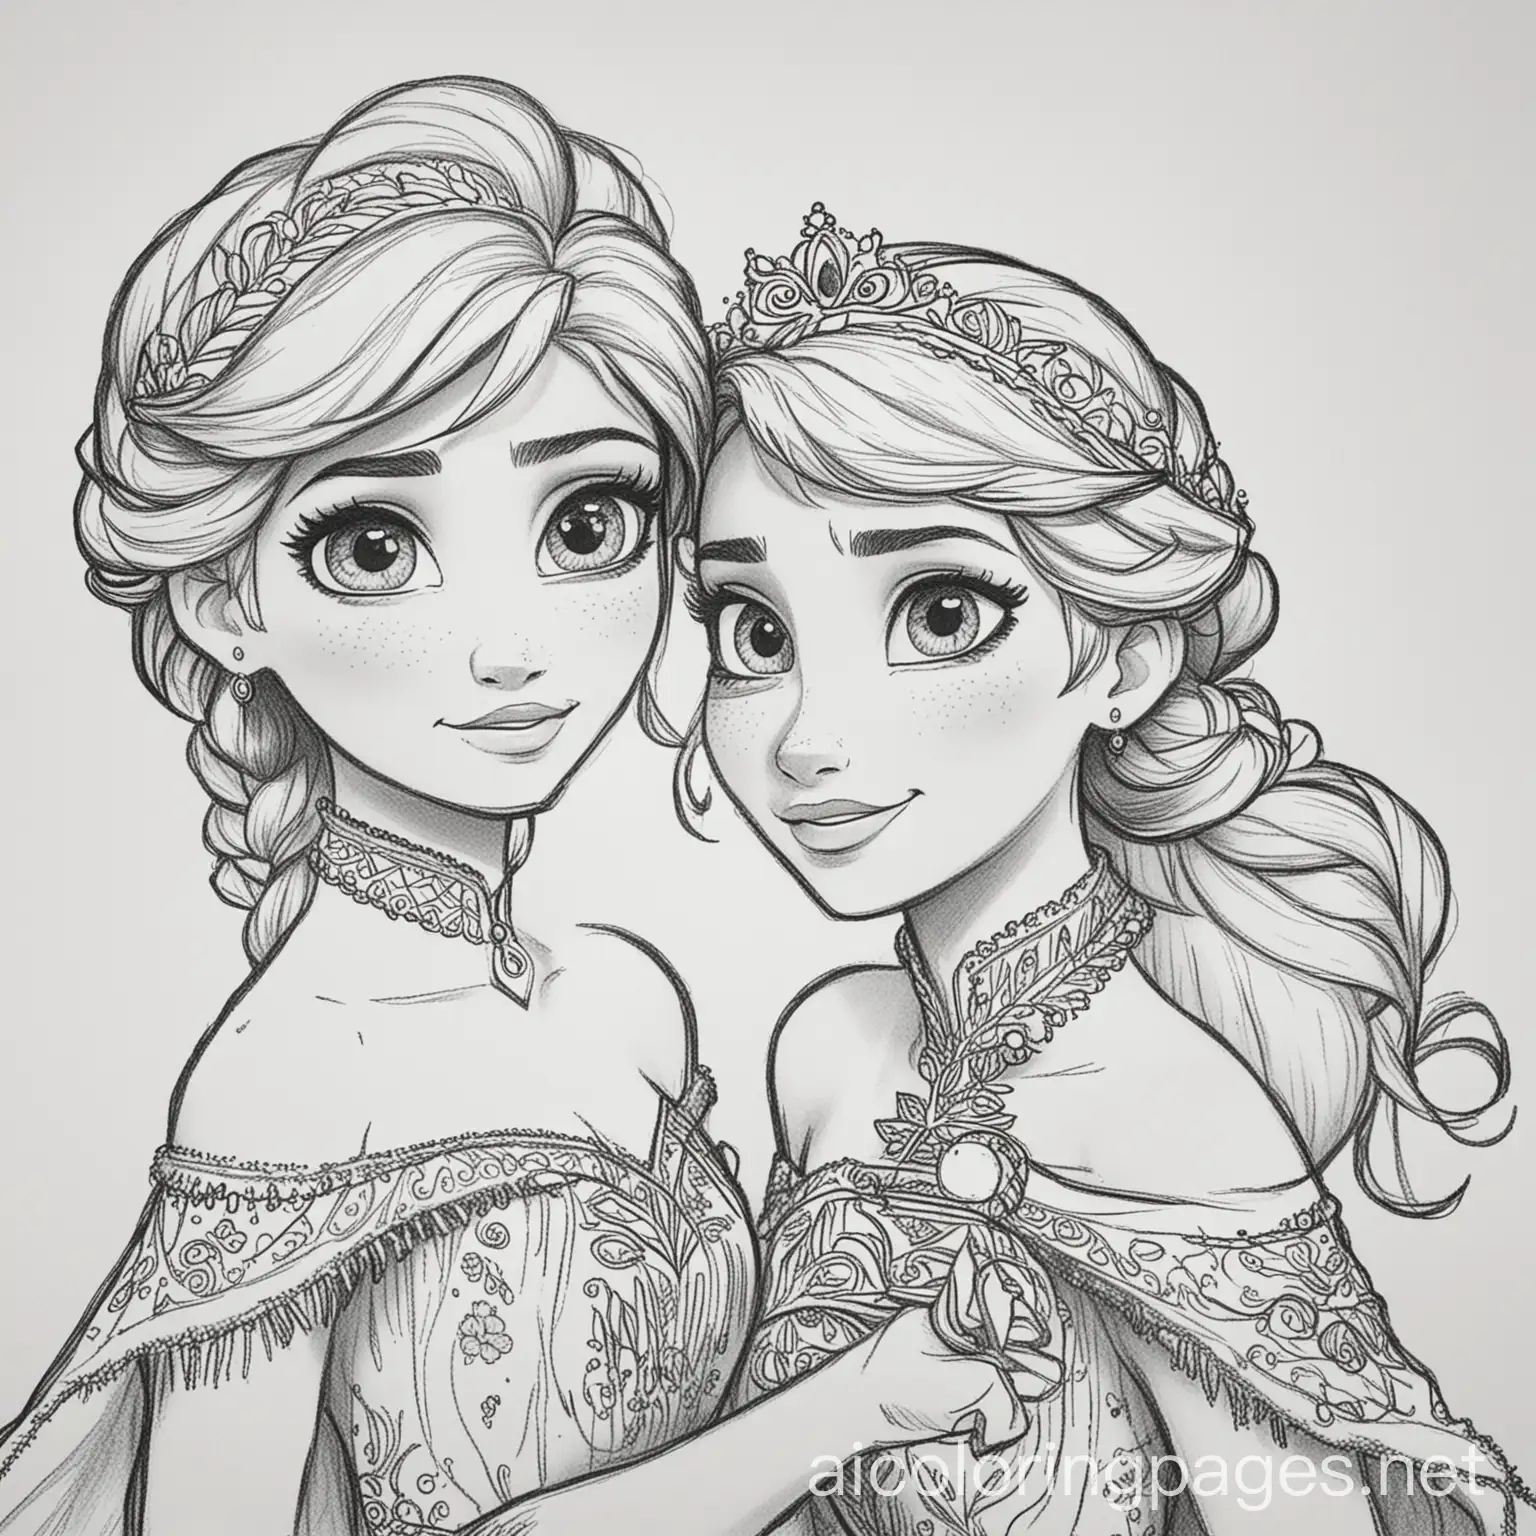 anna and elsa from frozen playing together black and white coloring page, Coloring Page, black and white, line art, white background, Simplicity, Ample White Space. The background of the coloring page is plain white to make it easy for young children to color within the lines. The outlines of all the subjects are easy to distinguish, making it simple for kids to color without too much difficulty